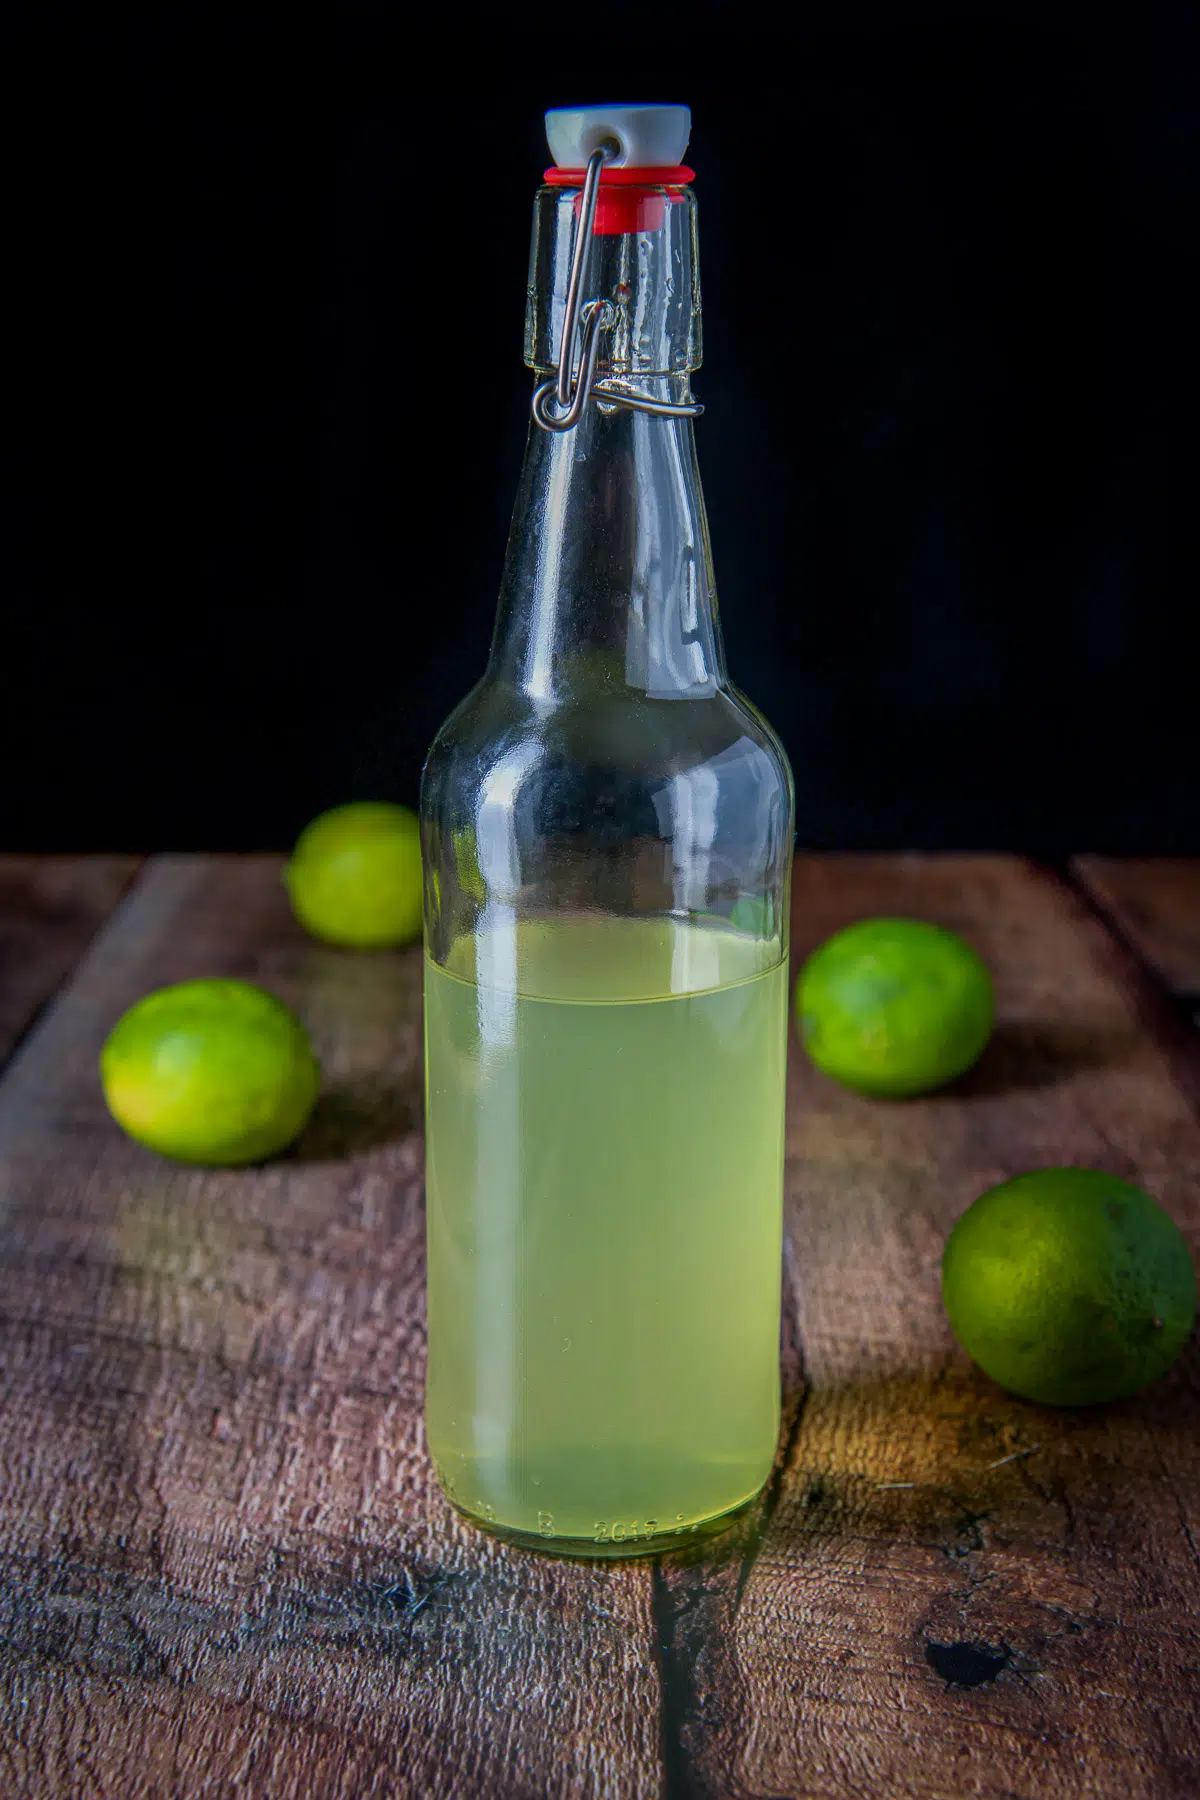 A capped bottle of green vodka with limes in the back